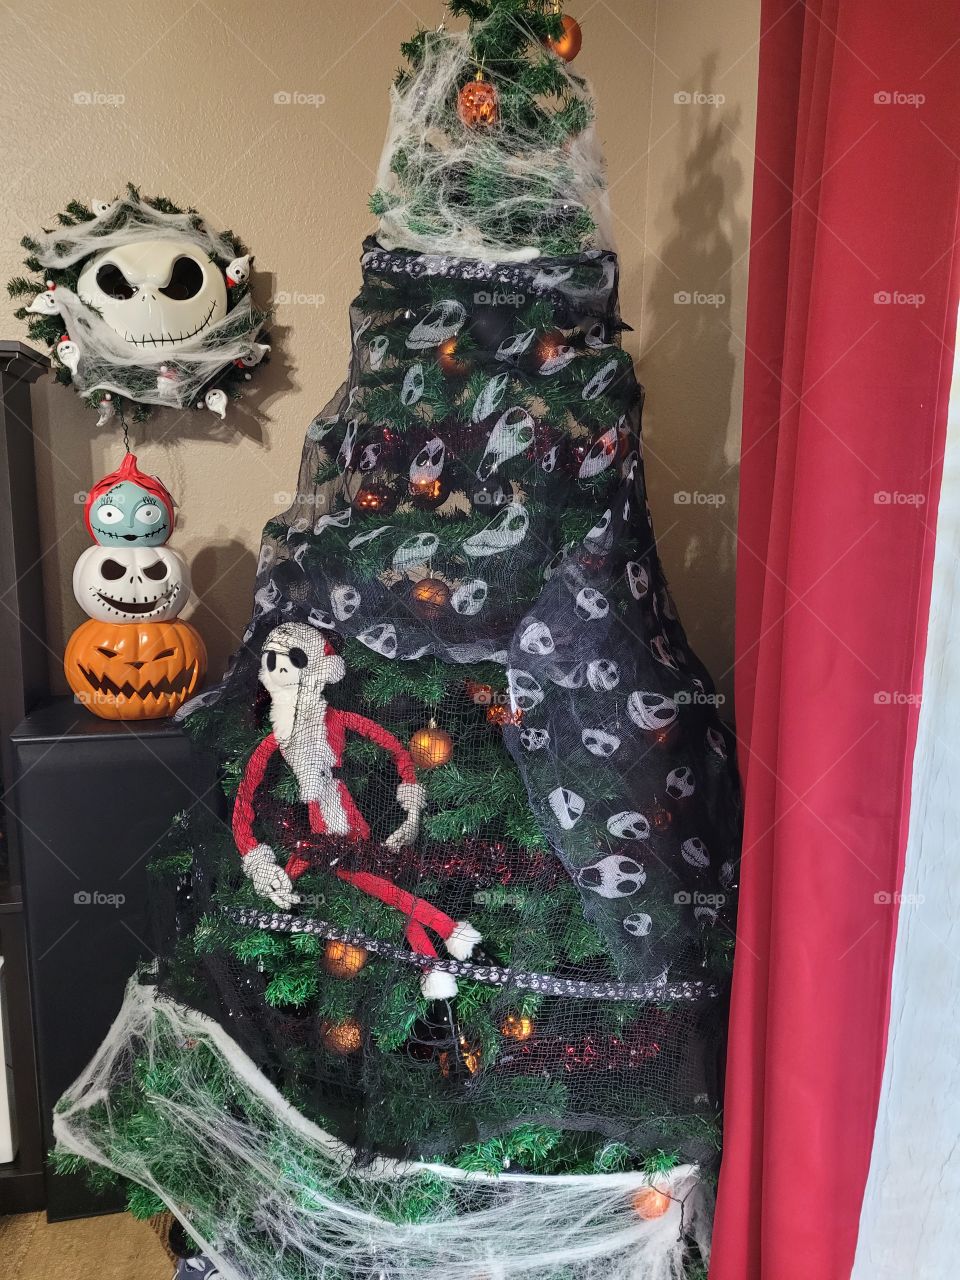 I love that I can decorate, with Nightmare Before Christmas for Halloween and Christmas.